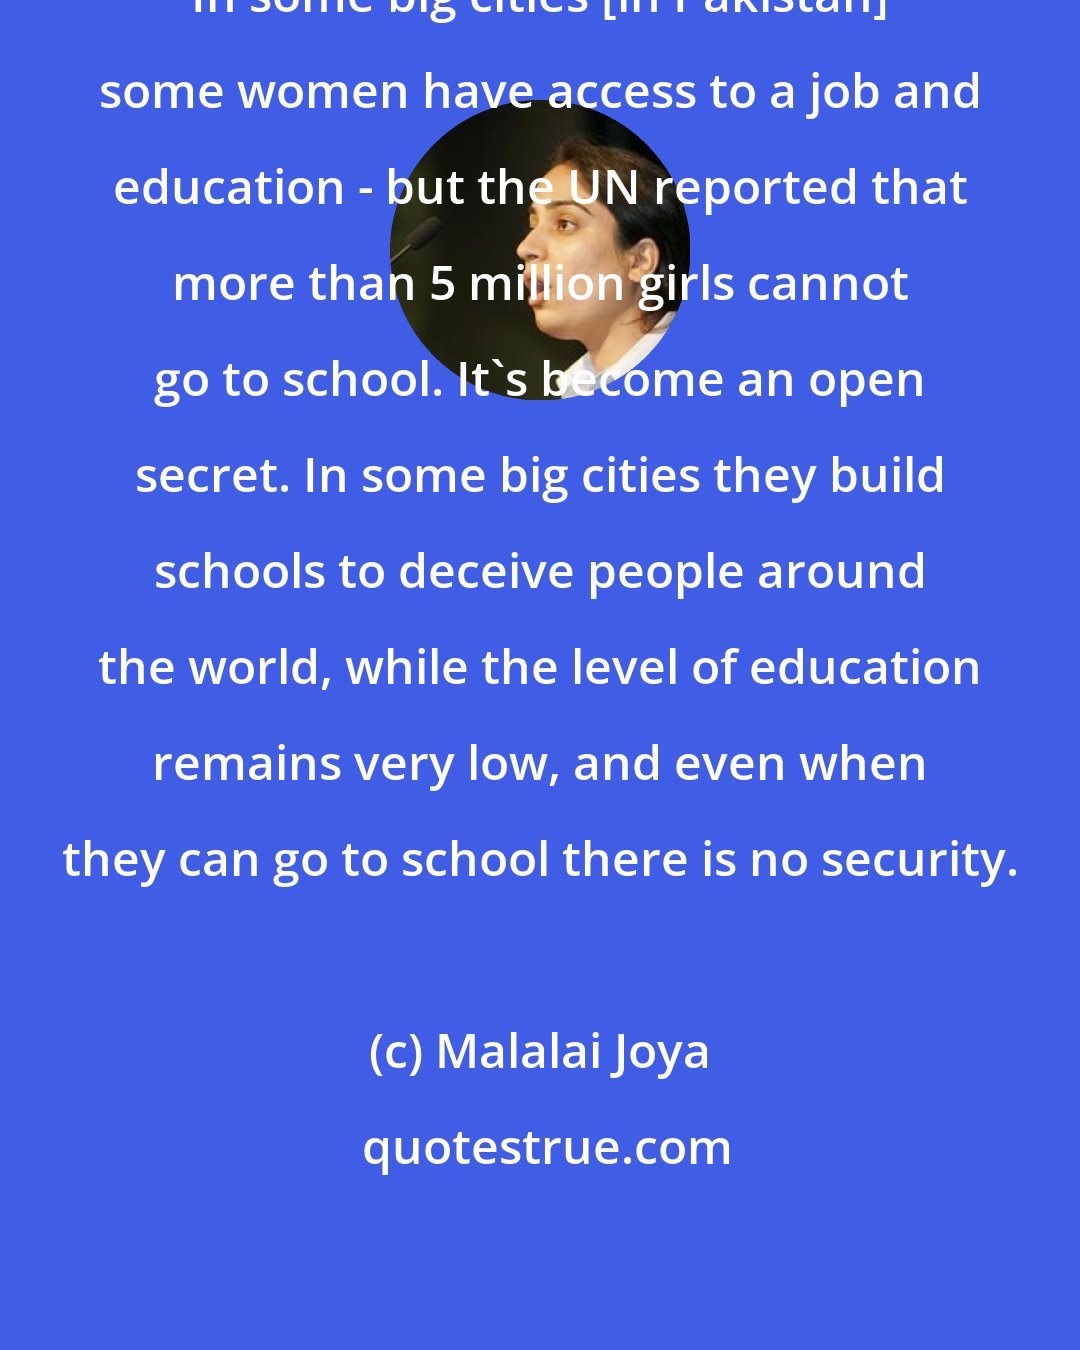 Malalai Joya: In some big cities [in Pakistan] some women have access to a job and education - but the UN reported that more than 5 million girls cannot go to school. It's become an open secret. In some big cities they build schools to deceive people around the world, while the level of education remains very low, and even when they can go to school there is no security.